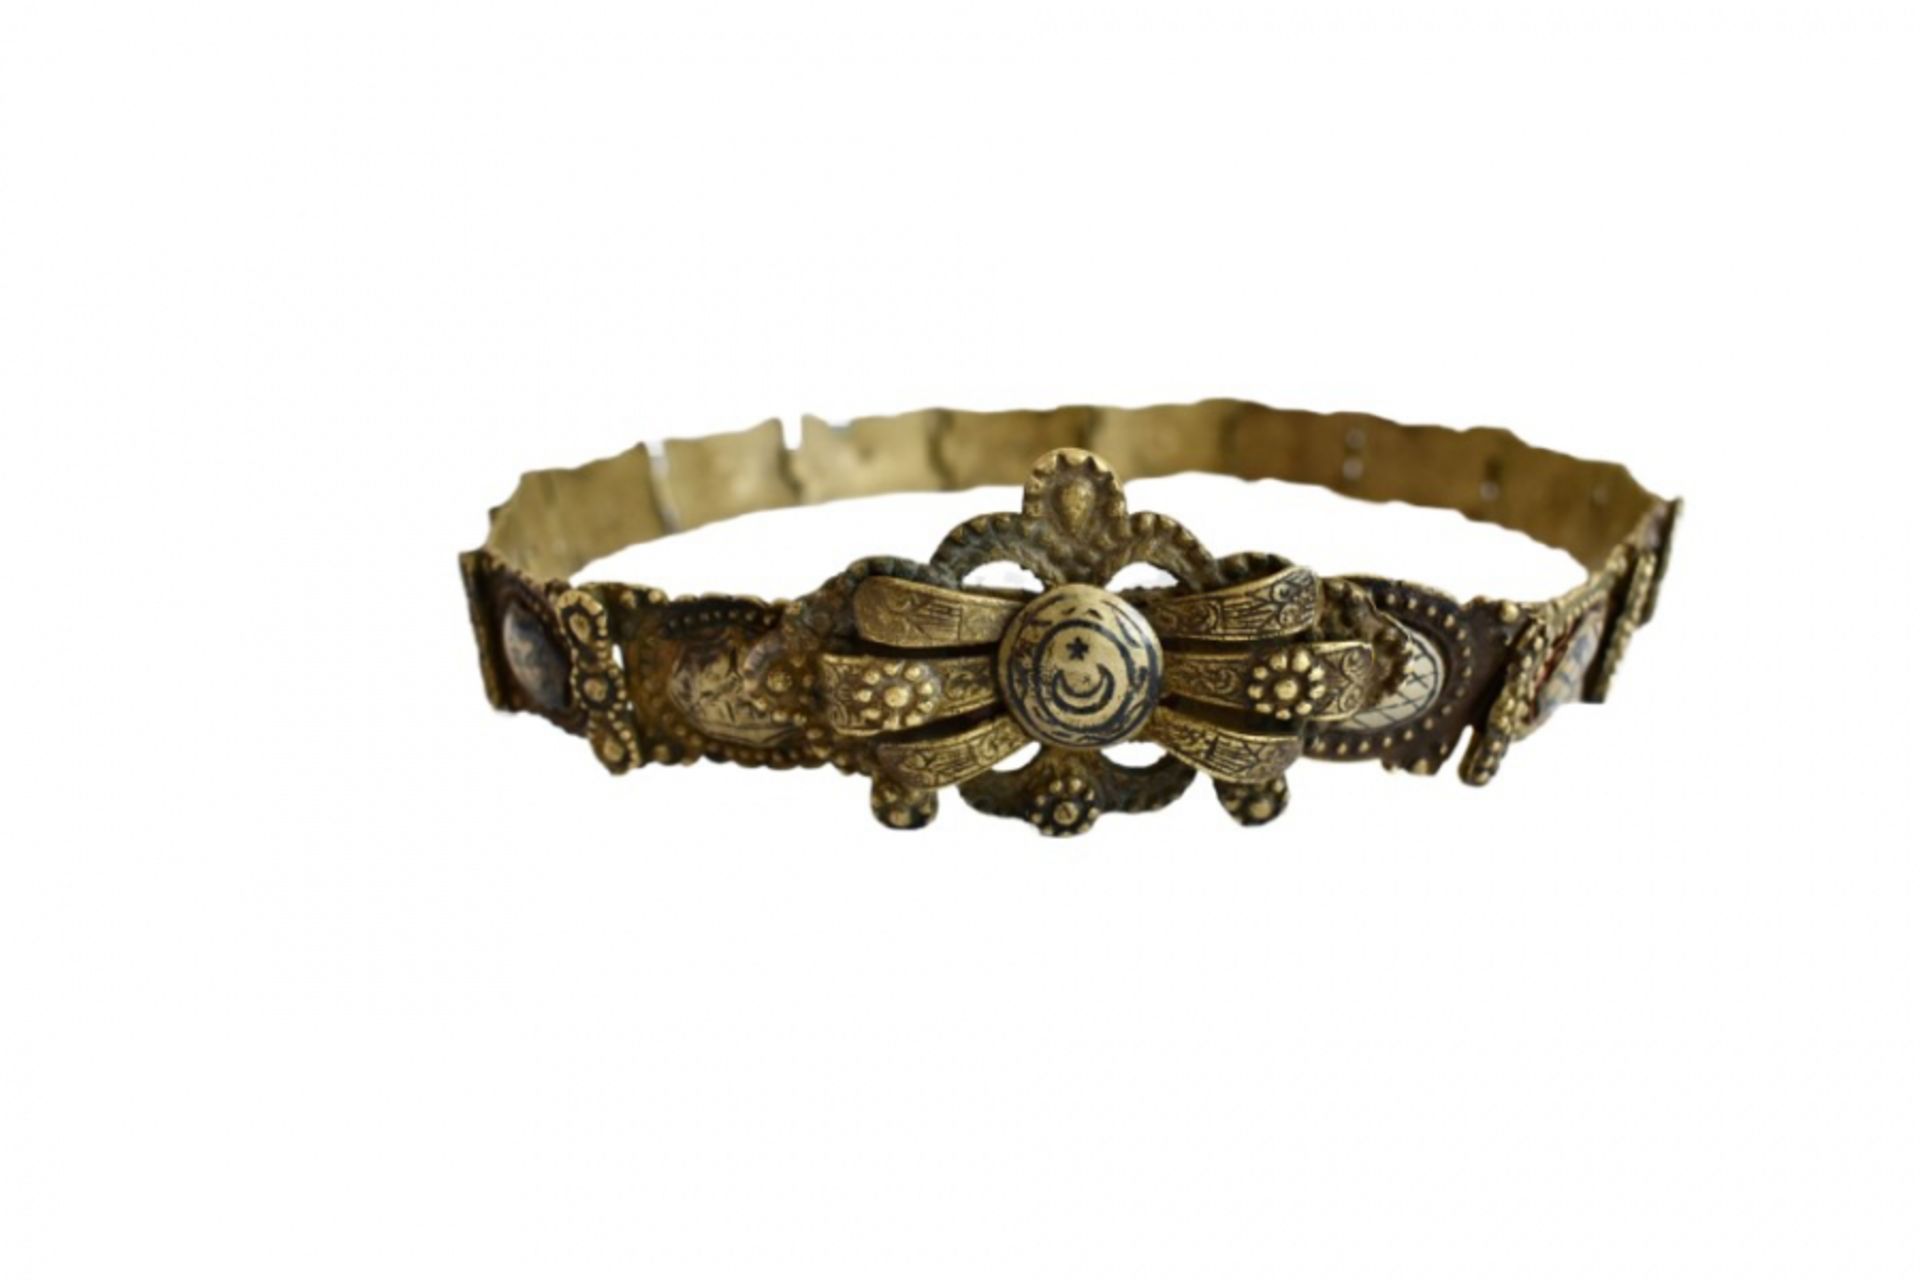 Ottoman period Constitutional bridal belt - Image 3 of 5